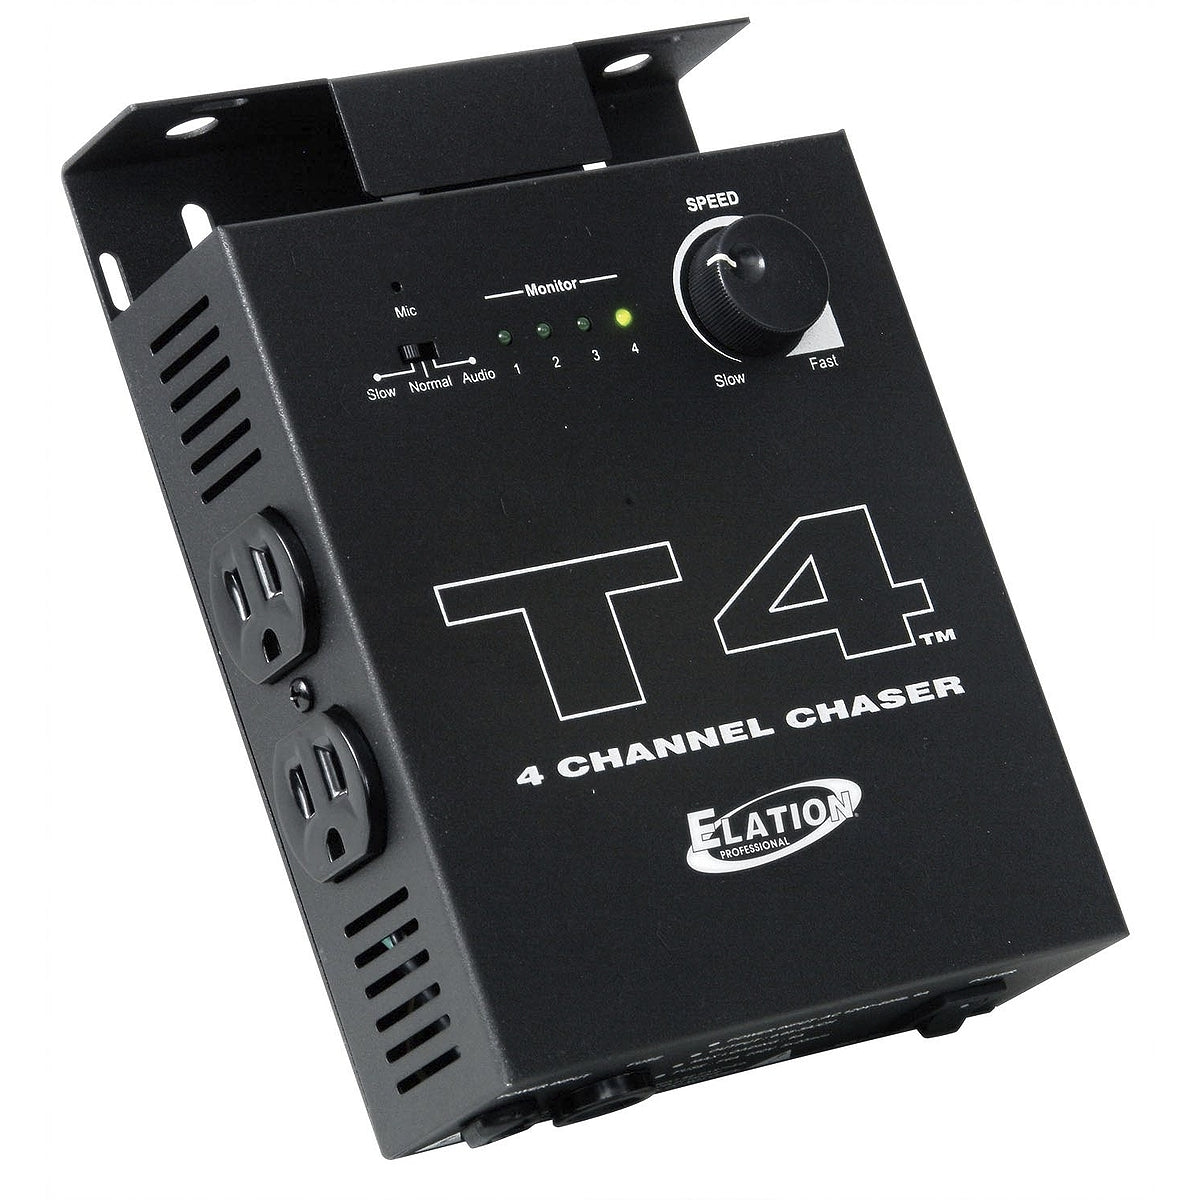 ADJ T4 Instant Sound-to-light Chase Controller (Used)